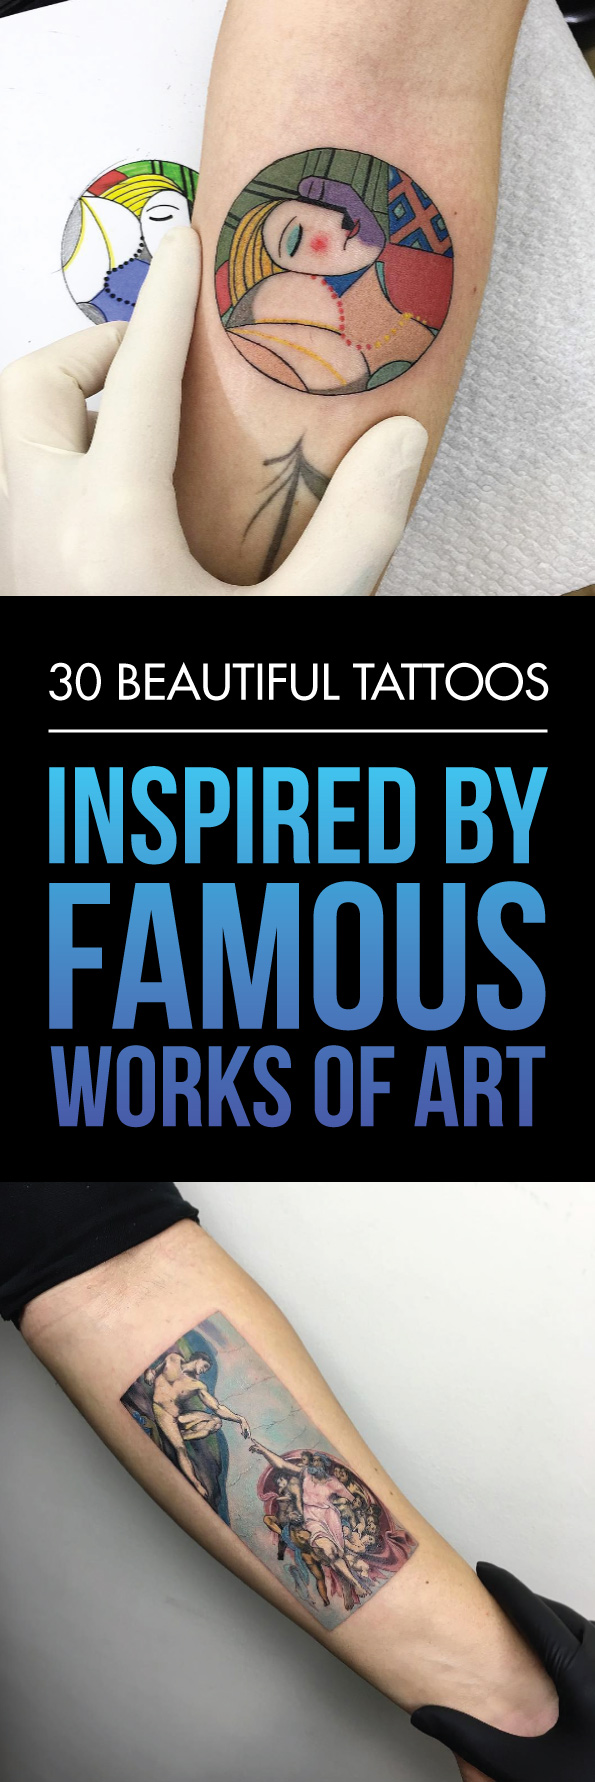 30 Beautiful Tattoos Inspired by Famous Works of Art | TattooBlend